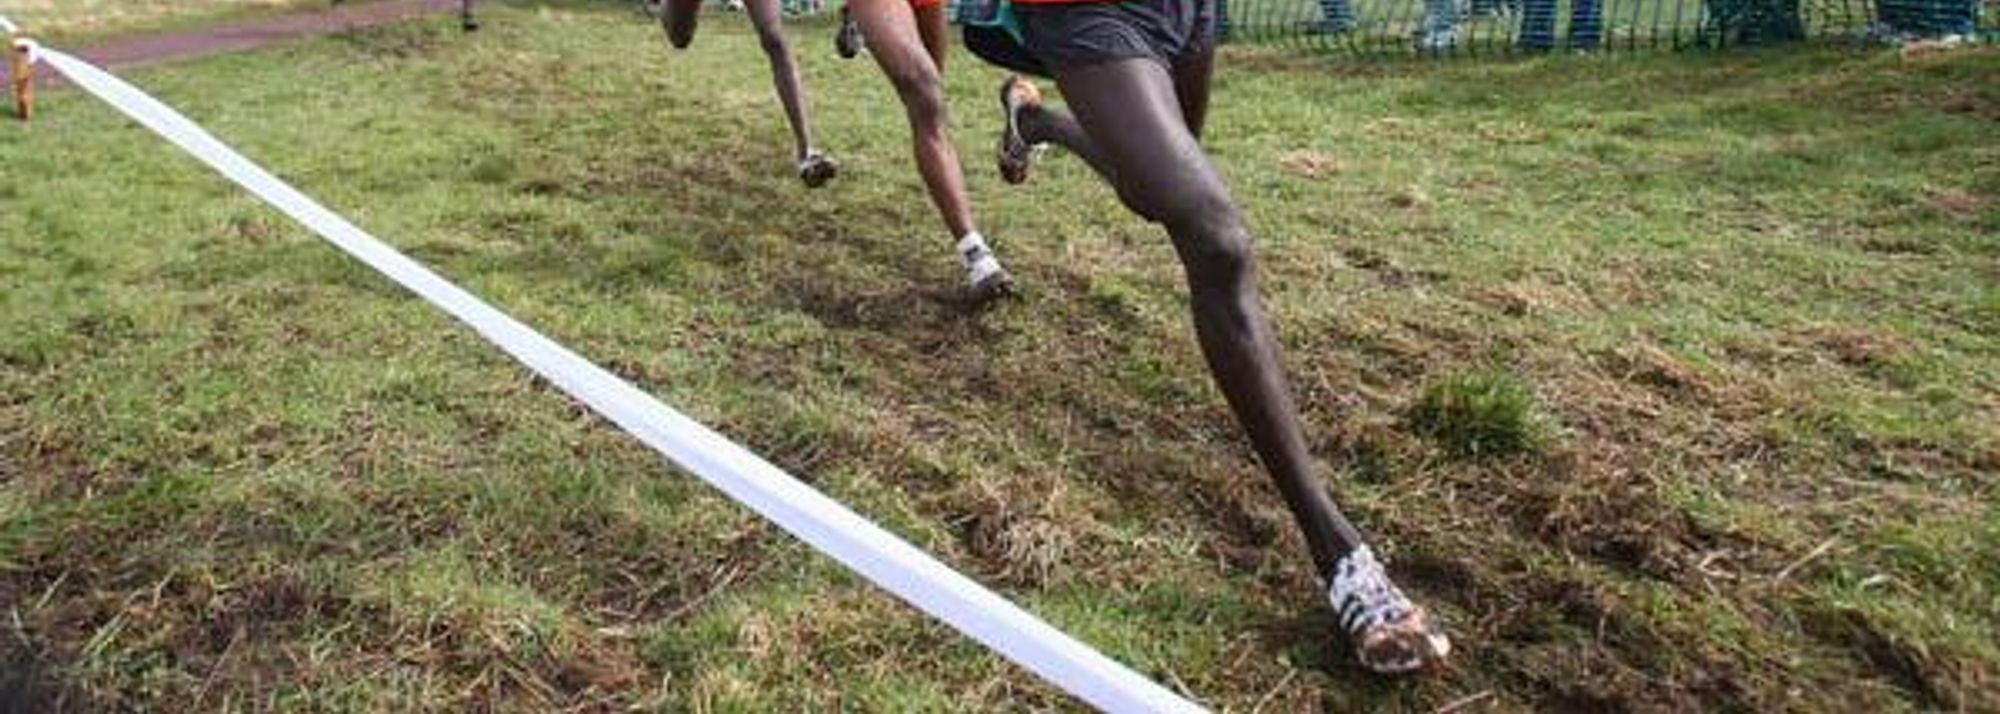 After three years in Kenyan hands, Ethiopia regained the Junior Men’s individual title over 8 kilometres today as Ibrahim Jeilan used his proven track speed to see off his challengers in the <STRONG>36th IAAF World Cross Country Championships </STRONG>at Holyrood Park. Jeilan, the World Junior 10,000m champion, thus made up for his failure to finish in the corresponding race in Mombasa last year and for his fifth place in Fukuoka two years ago.